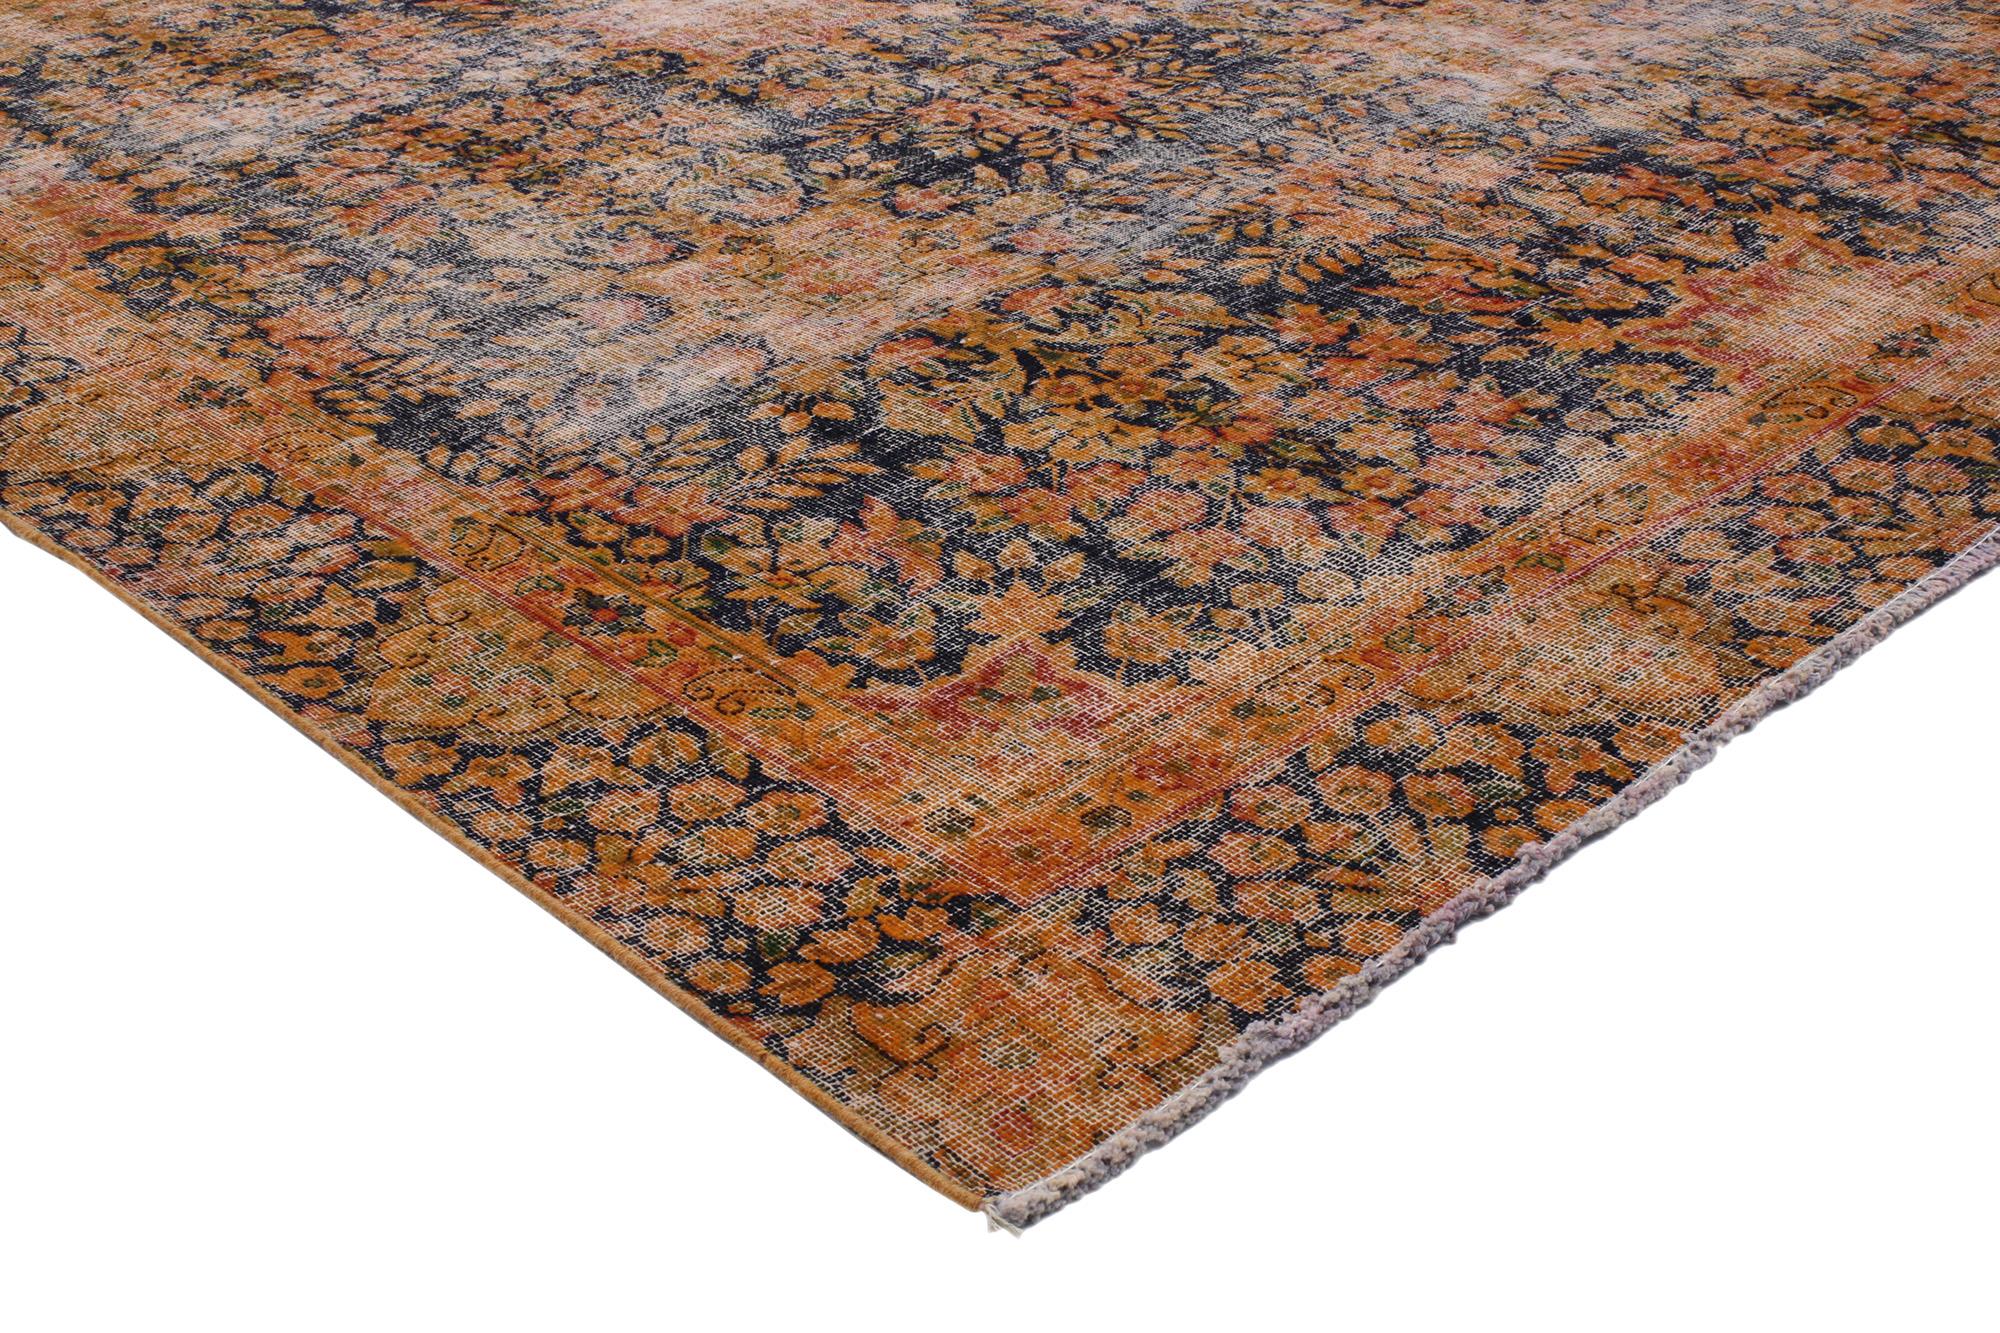 80304 Distressed Vintage Persian Kerman Rug, 07’01 x 10’03. Distressed Persian Kerman rugs are a specialized type of Persian rug that undergo intentional distressing techniques to achieve a vintage appearance, mimicking the charm of antique rugs